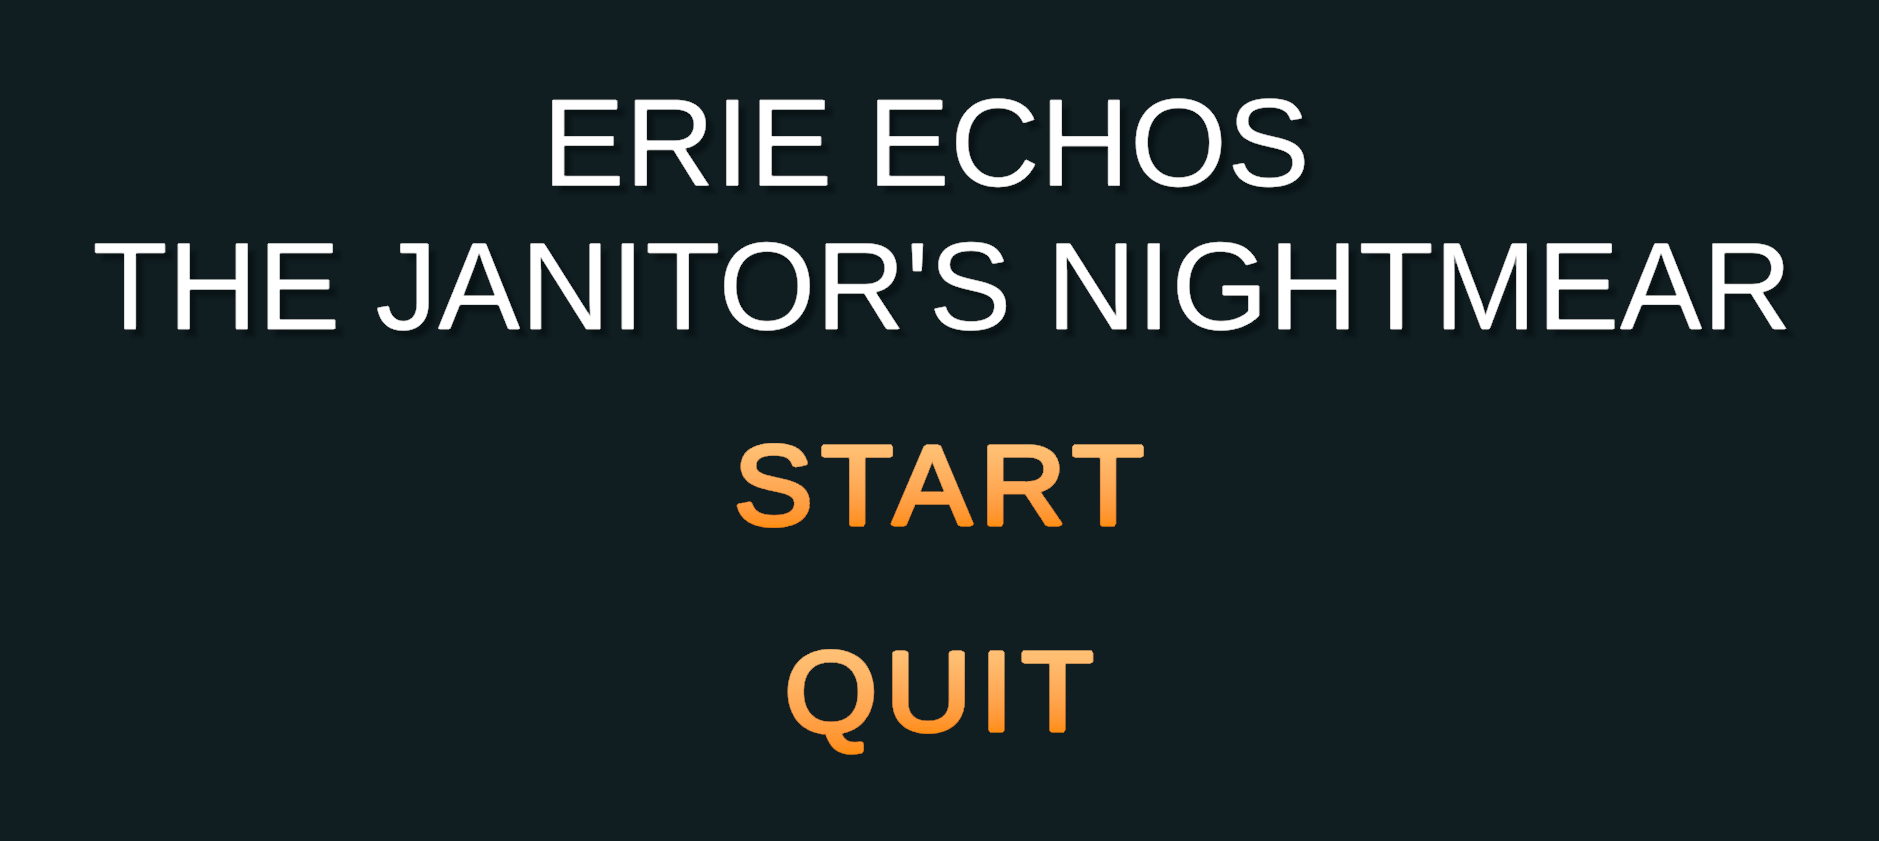 Erie Echoes - The Janitor's Nightmare